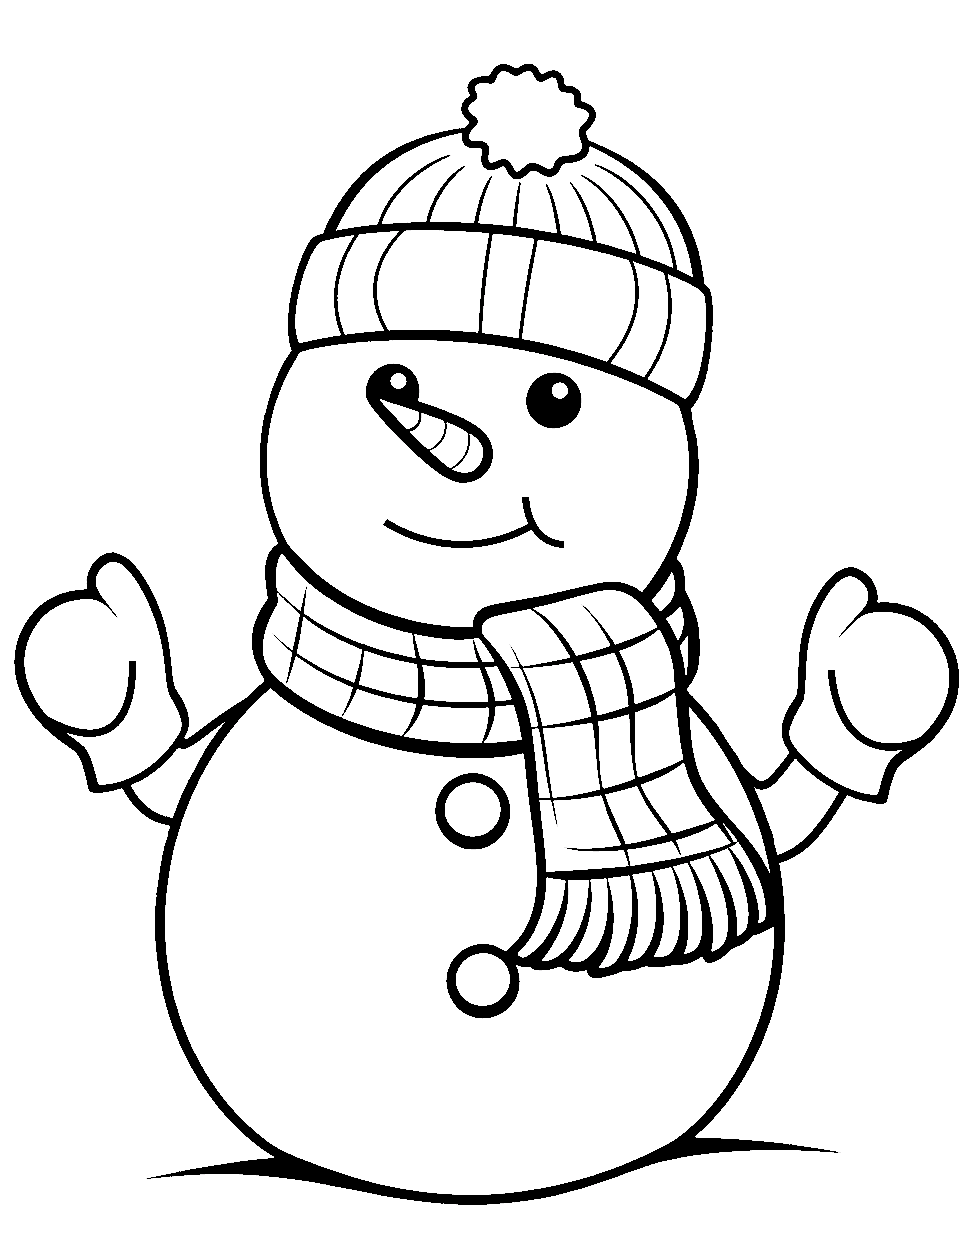 Snowman with Mittens Coloring Page - A snowman dressed in a hat and mittens, enjoying the cold weather.